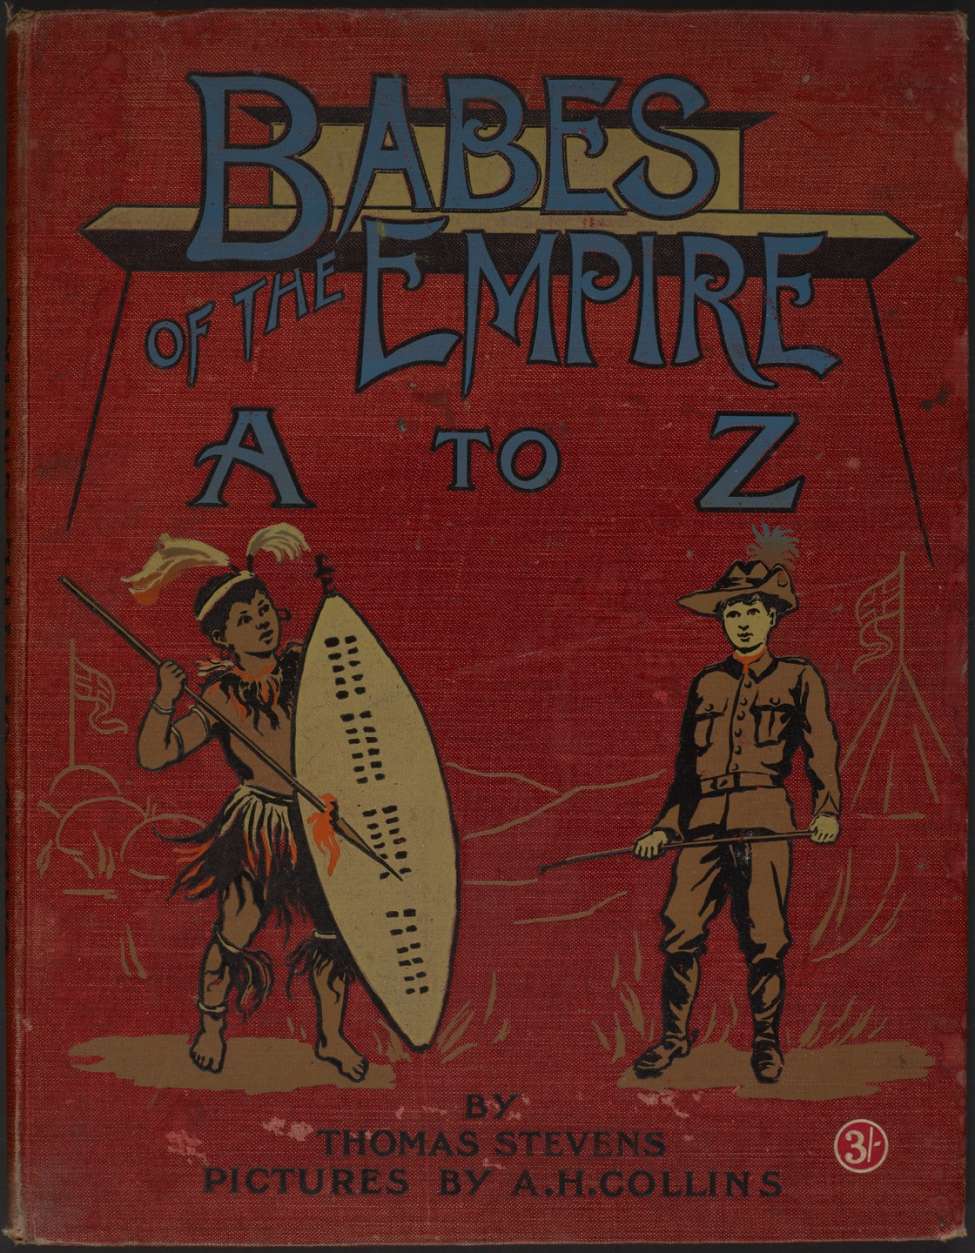 Comic Book Cover For Babes of the Empire A to Z